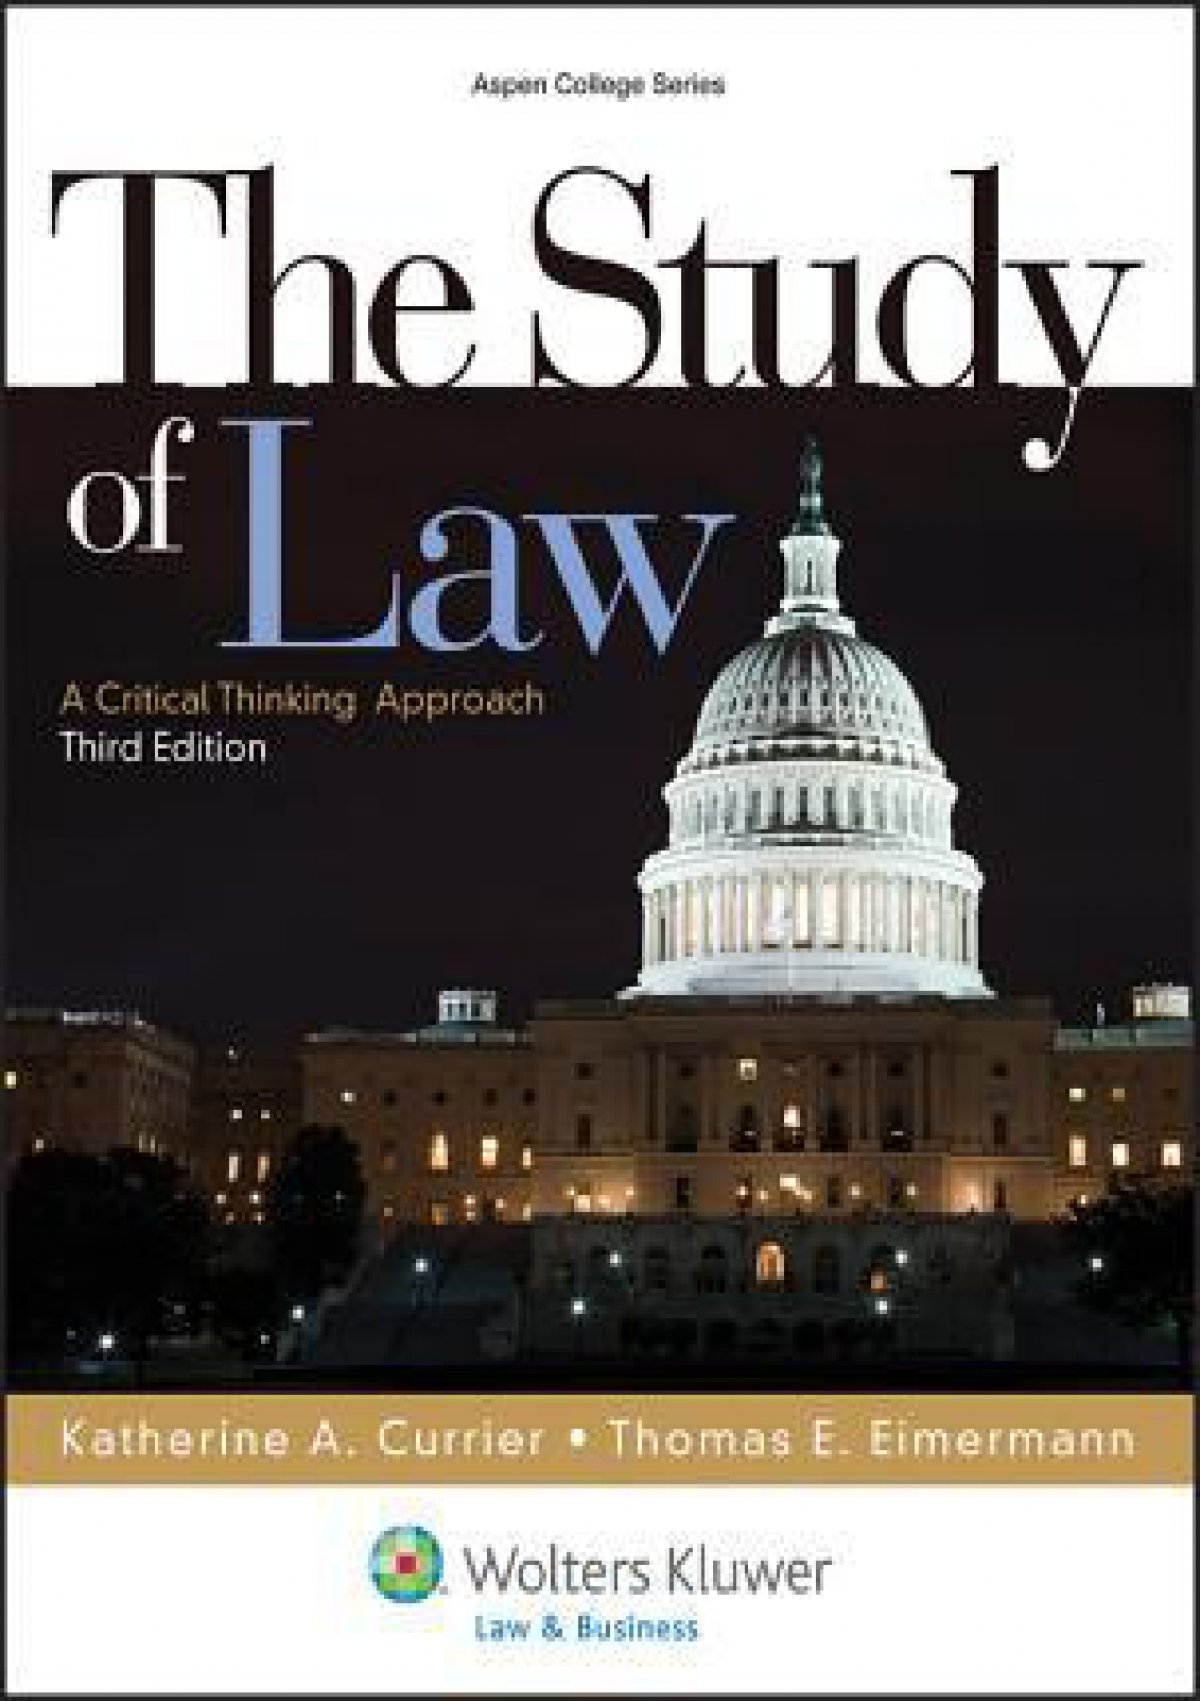 the study of law a critical thinking approach ebook